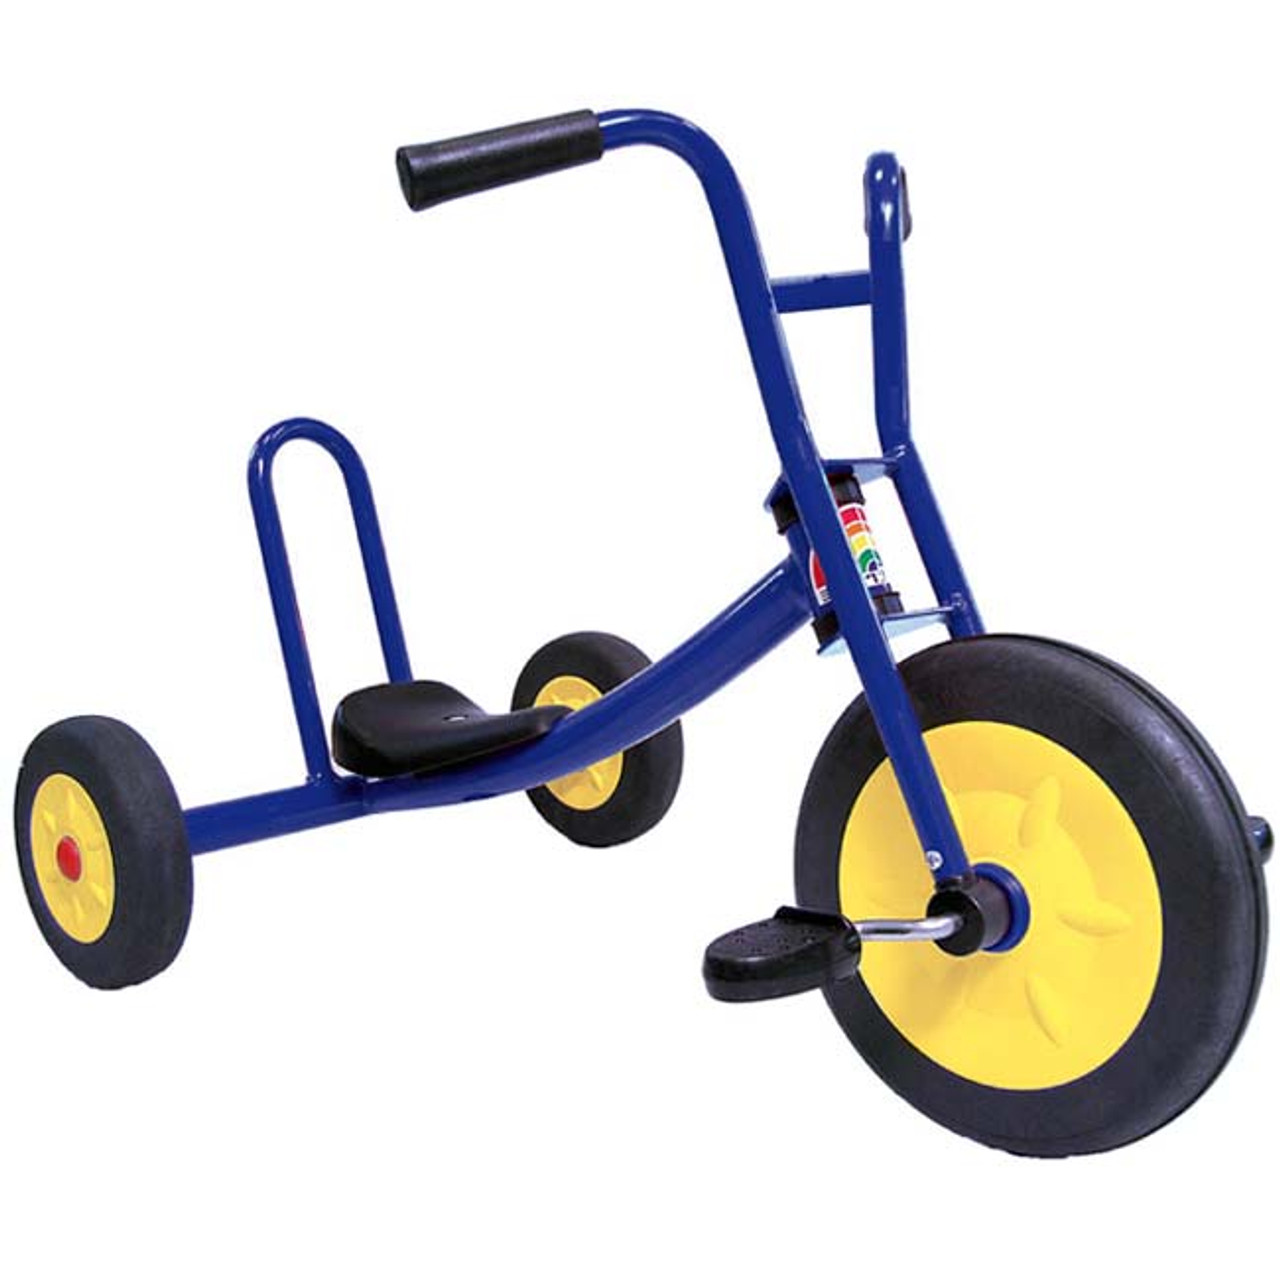 tricycle italtrike